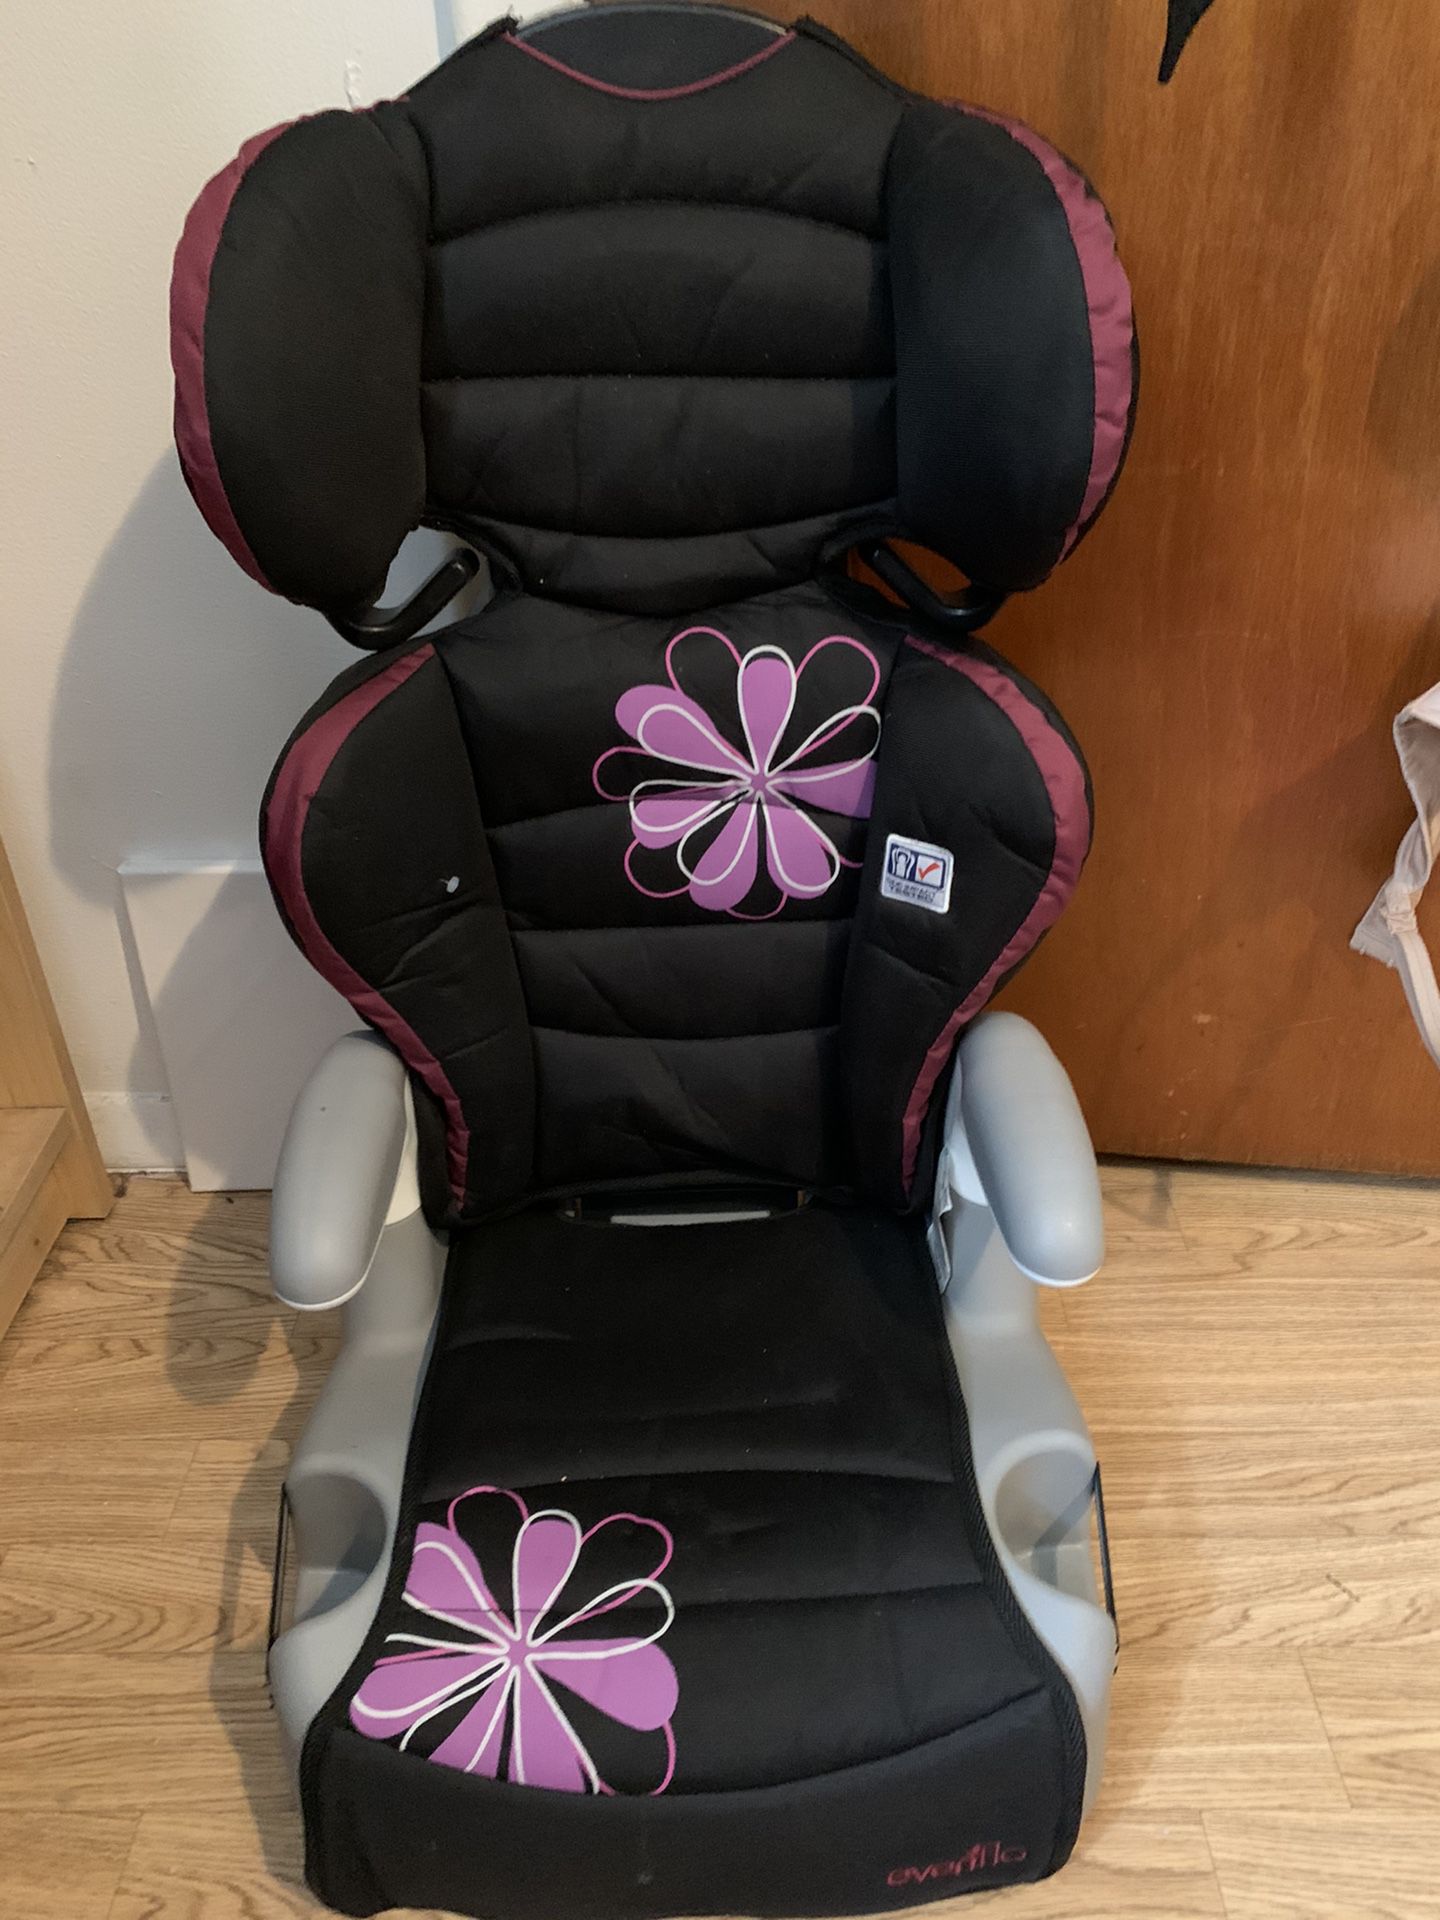 Even flow booster seat